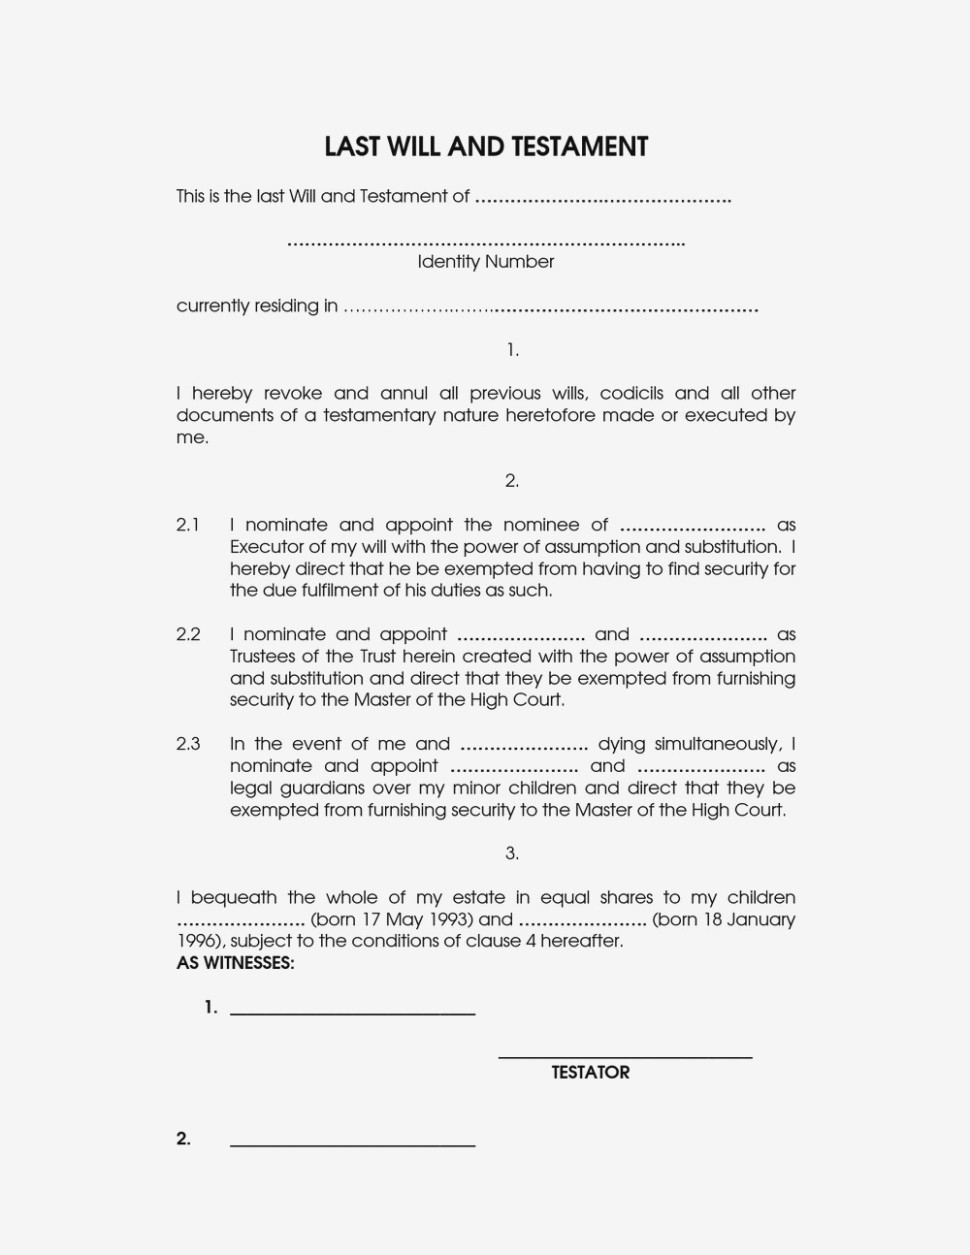 Free Printable Last Will And Testament Forms Uk | Resume Examples - Free Printable Will Forms